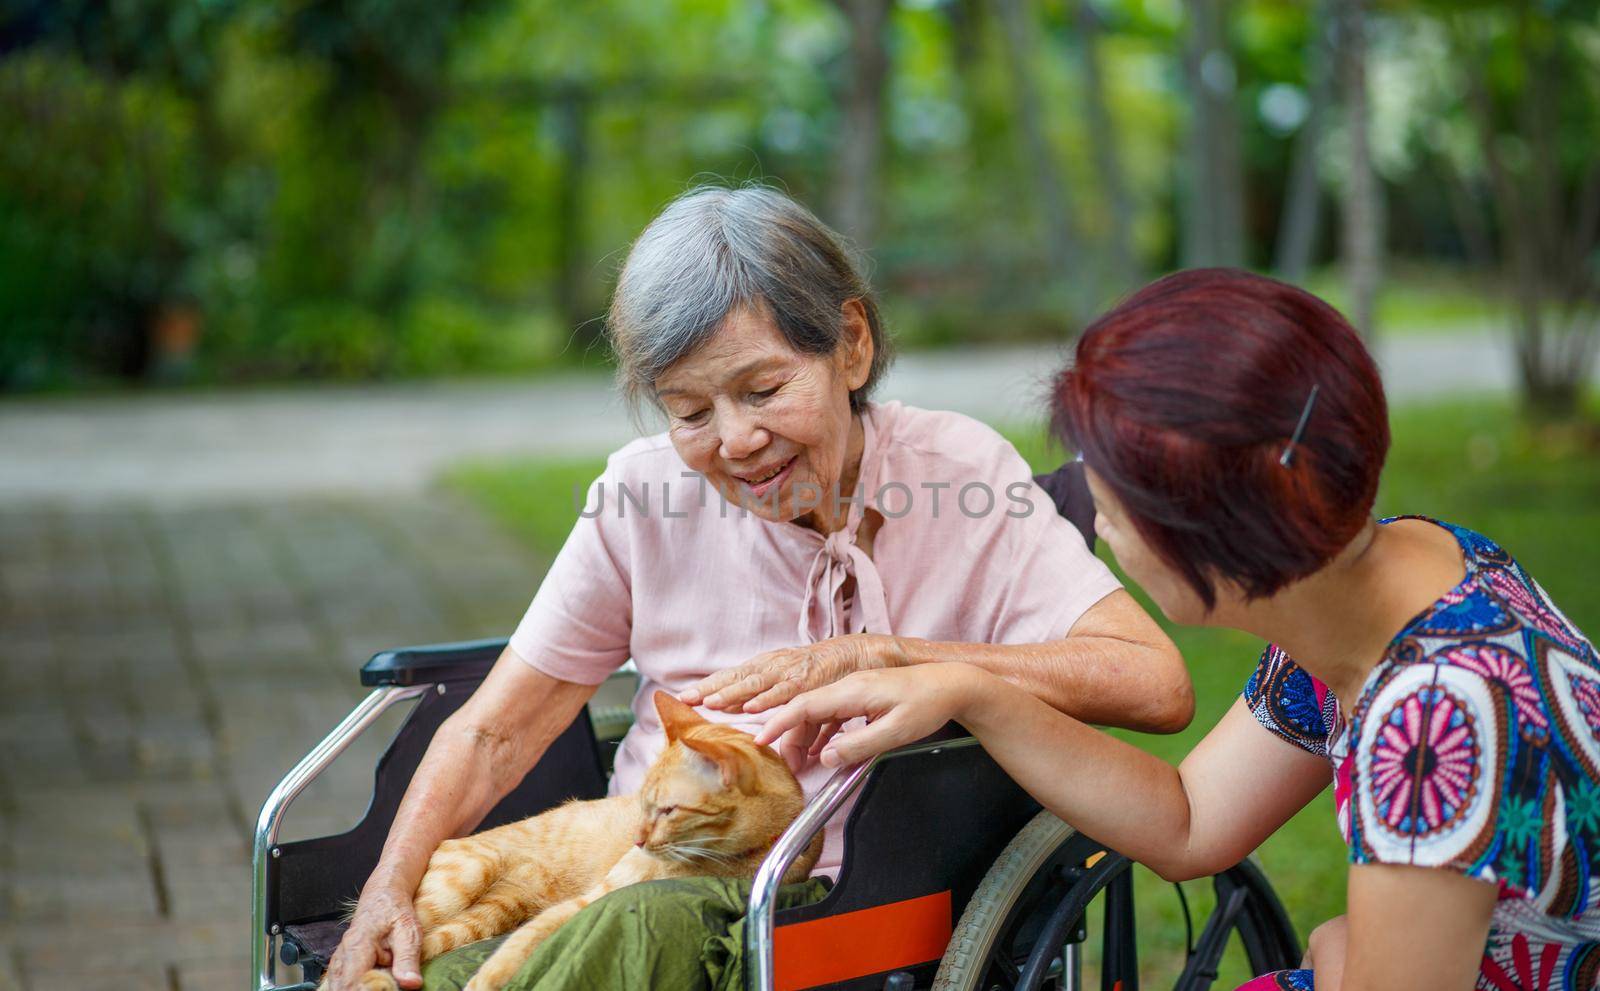 Pet therapy for the Elderly . Pets make patients healtier and happier. by toa55